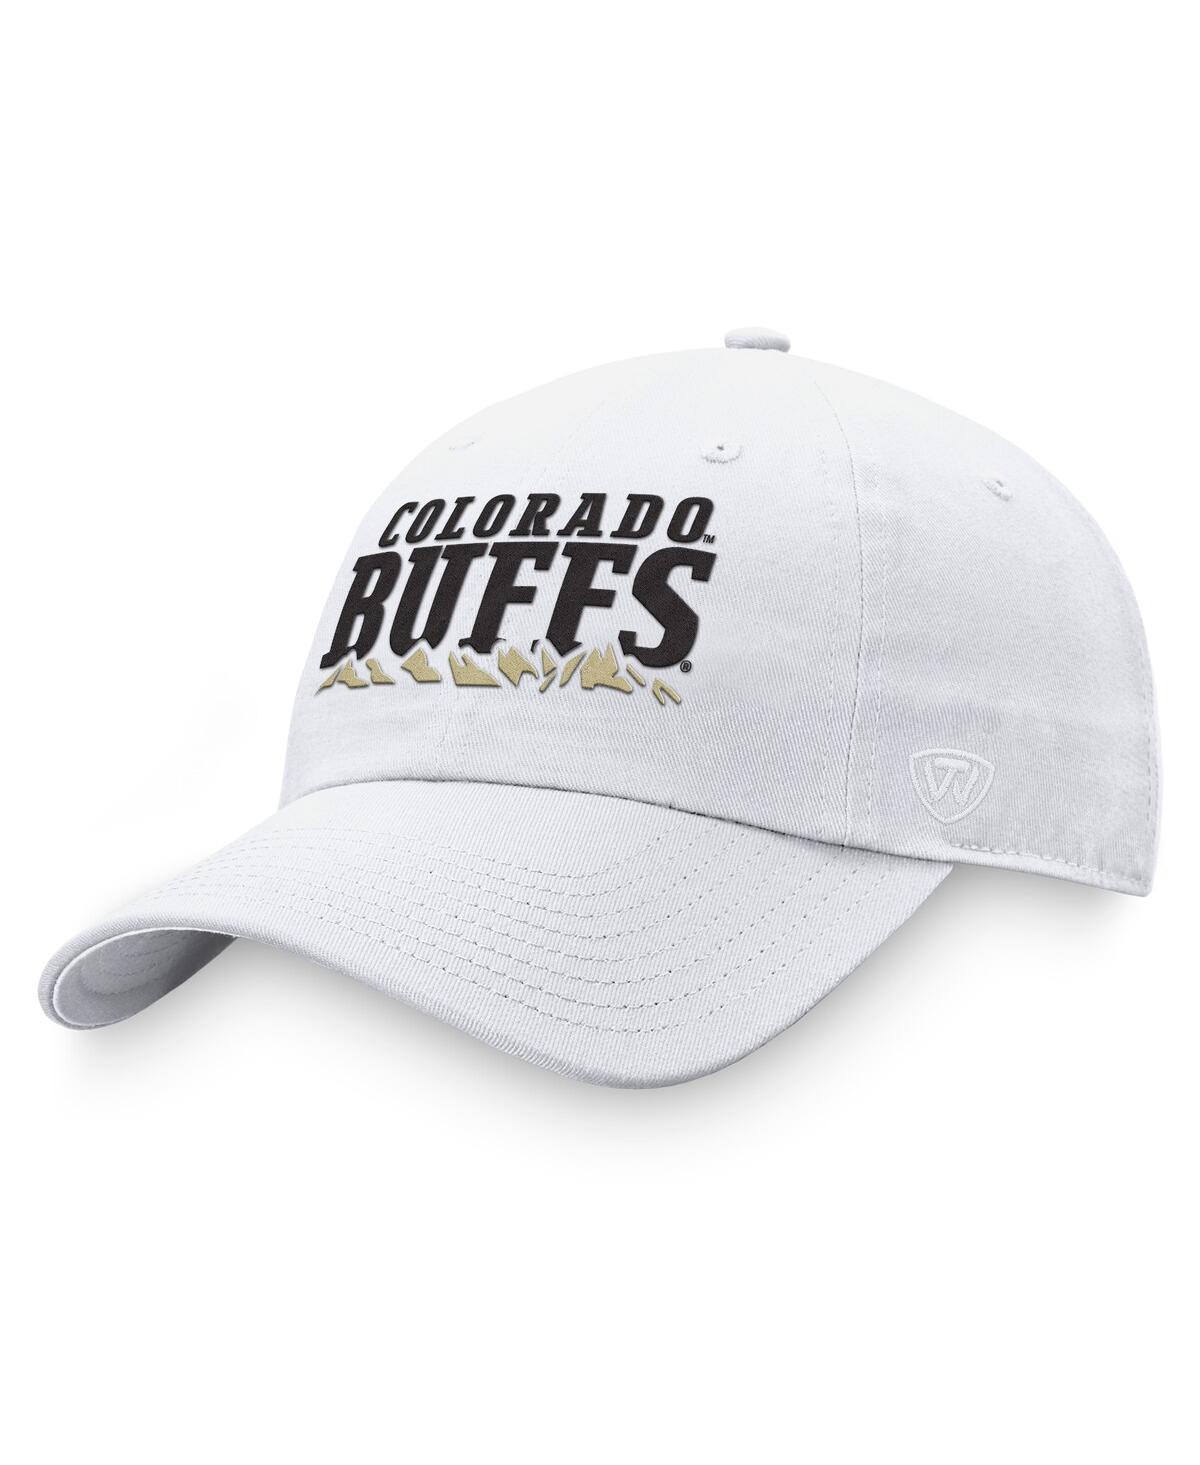 Men's Top of the World White Colorado Buffaloes Adjustable Hat - White